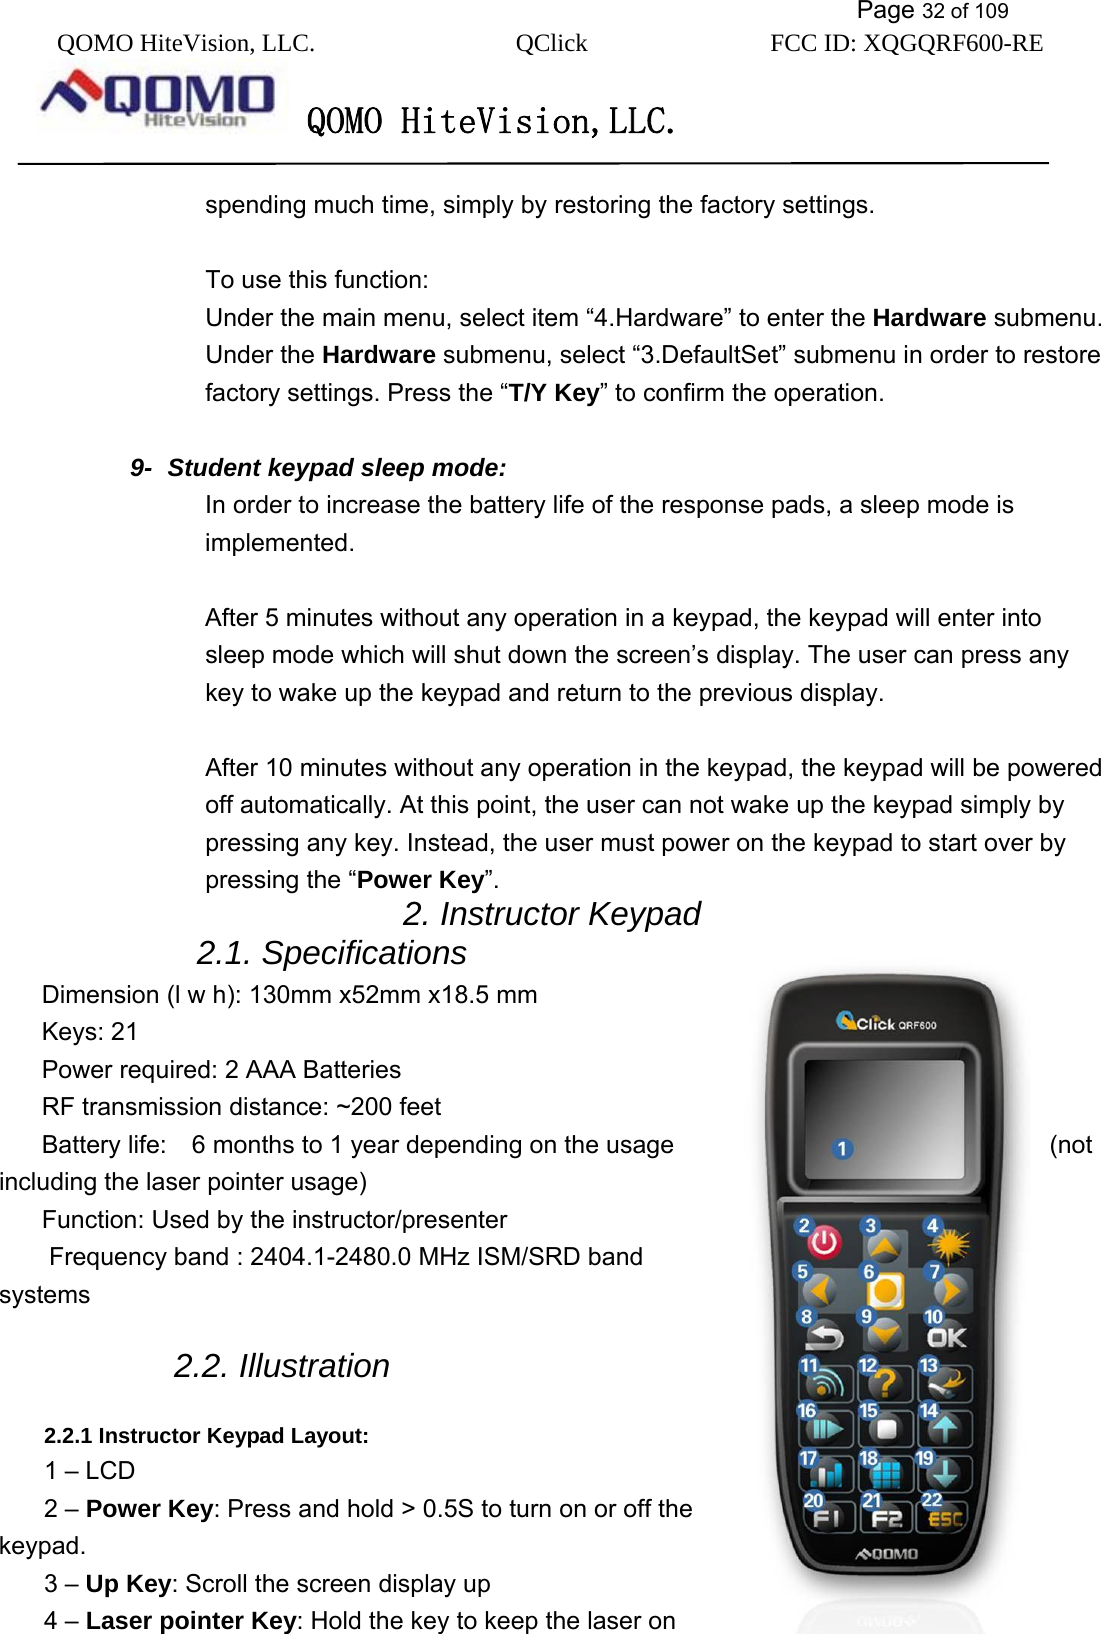           Page 32 of 109 QOMO HiteVision, LLC.  QClick        FCC ID: XQGQRF600-RE     QOMO HiteVision,LLC.   spending much time, simply by restoring the factory settings.    To use this function: Under the main menu, select item “4.Hardware” to enter the Hardware submenu. Under the Hardware submenu, select “3.DefaultSet” submenu in order to restore factory settings. Press the “T/Y Key” to confirm the operation.  9-  Student keypad sleep mode: In order to increase the battery life of the response pads, a sleep mode is implemented.   After 5 minutes without any operation in a keypad, the keypad will enter into sleep mode which will shut down the screen’s display. The user can press any key to wake up the keypad and return to the previous display.  After 10 minutes without any operation in the keypad, the keypad will be powered off automatically. At this point, the user can not wake up the keypad simply by pressing any key. Instead, the user must power on the keypad to start over by pressing the “Power Key”. 2. Instructor Keypad   2.1. Specifications Dimension (l w h): 130mm x52mm x18.5 mm Keys: 21 Power required: 2 AAA Batteries RF transmission distance: ~200 feet Battery life:    6 months to 1 year depending on the usage  (not including the laser pointer usage)   Function: Used by the instructor/presenter   Frequency band : 2404.1-2480.0 MHz ISM/SRD band systems  2.2. Illustration  2.2.1 Instructor Keypad Layout: 1 – LCD 2 – Power Key: Press and hold &gt; 0.5S to turn on or off the keypad.  3 – Up Key: Scroll the screen display up   4 – Laser pointer Key: Hold the key to keep the laser on 